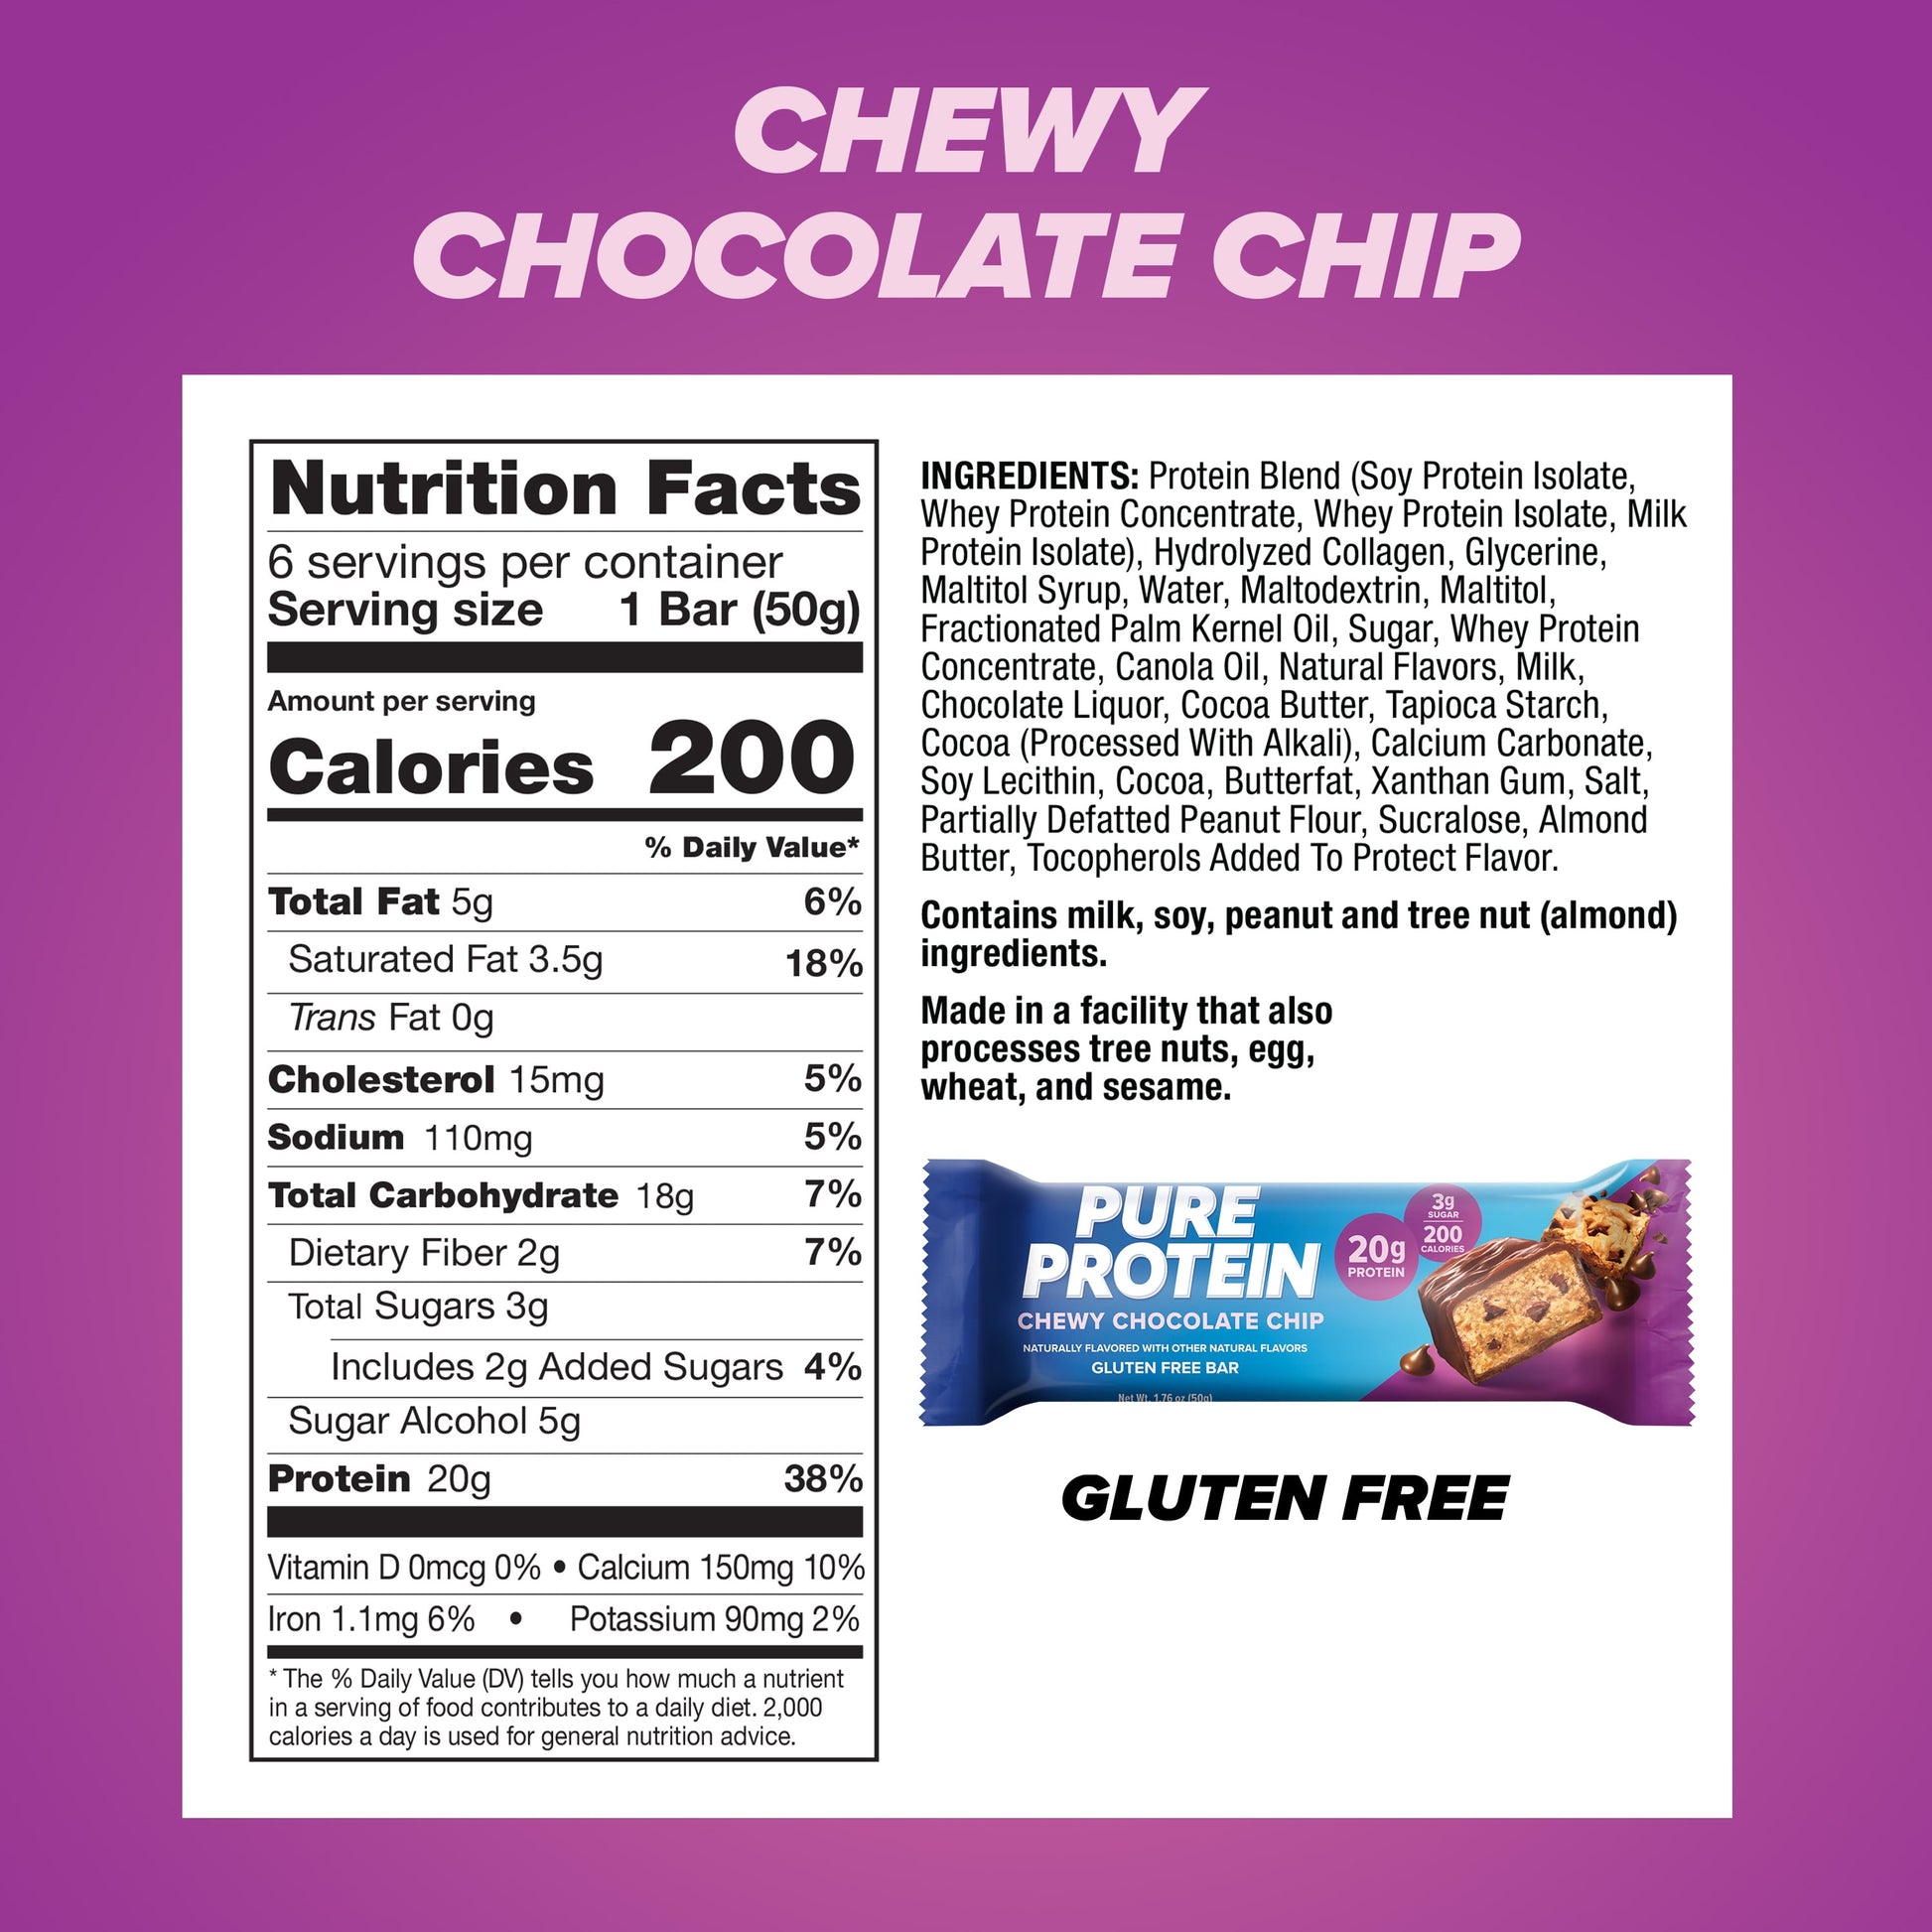 (3 Pack)  Bars, Chewy Chocolate Chip, 20G Protein, 1.76 Oz, 6 Ct